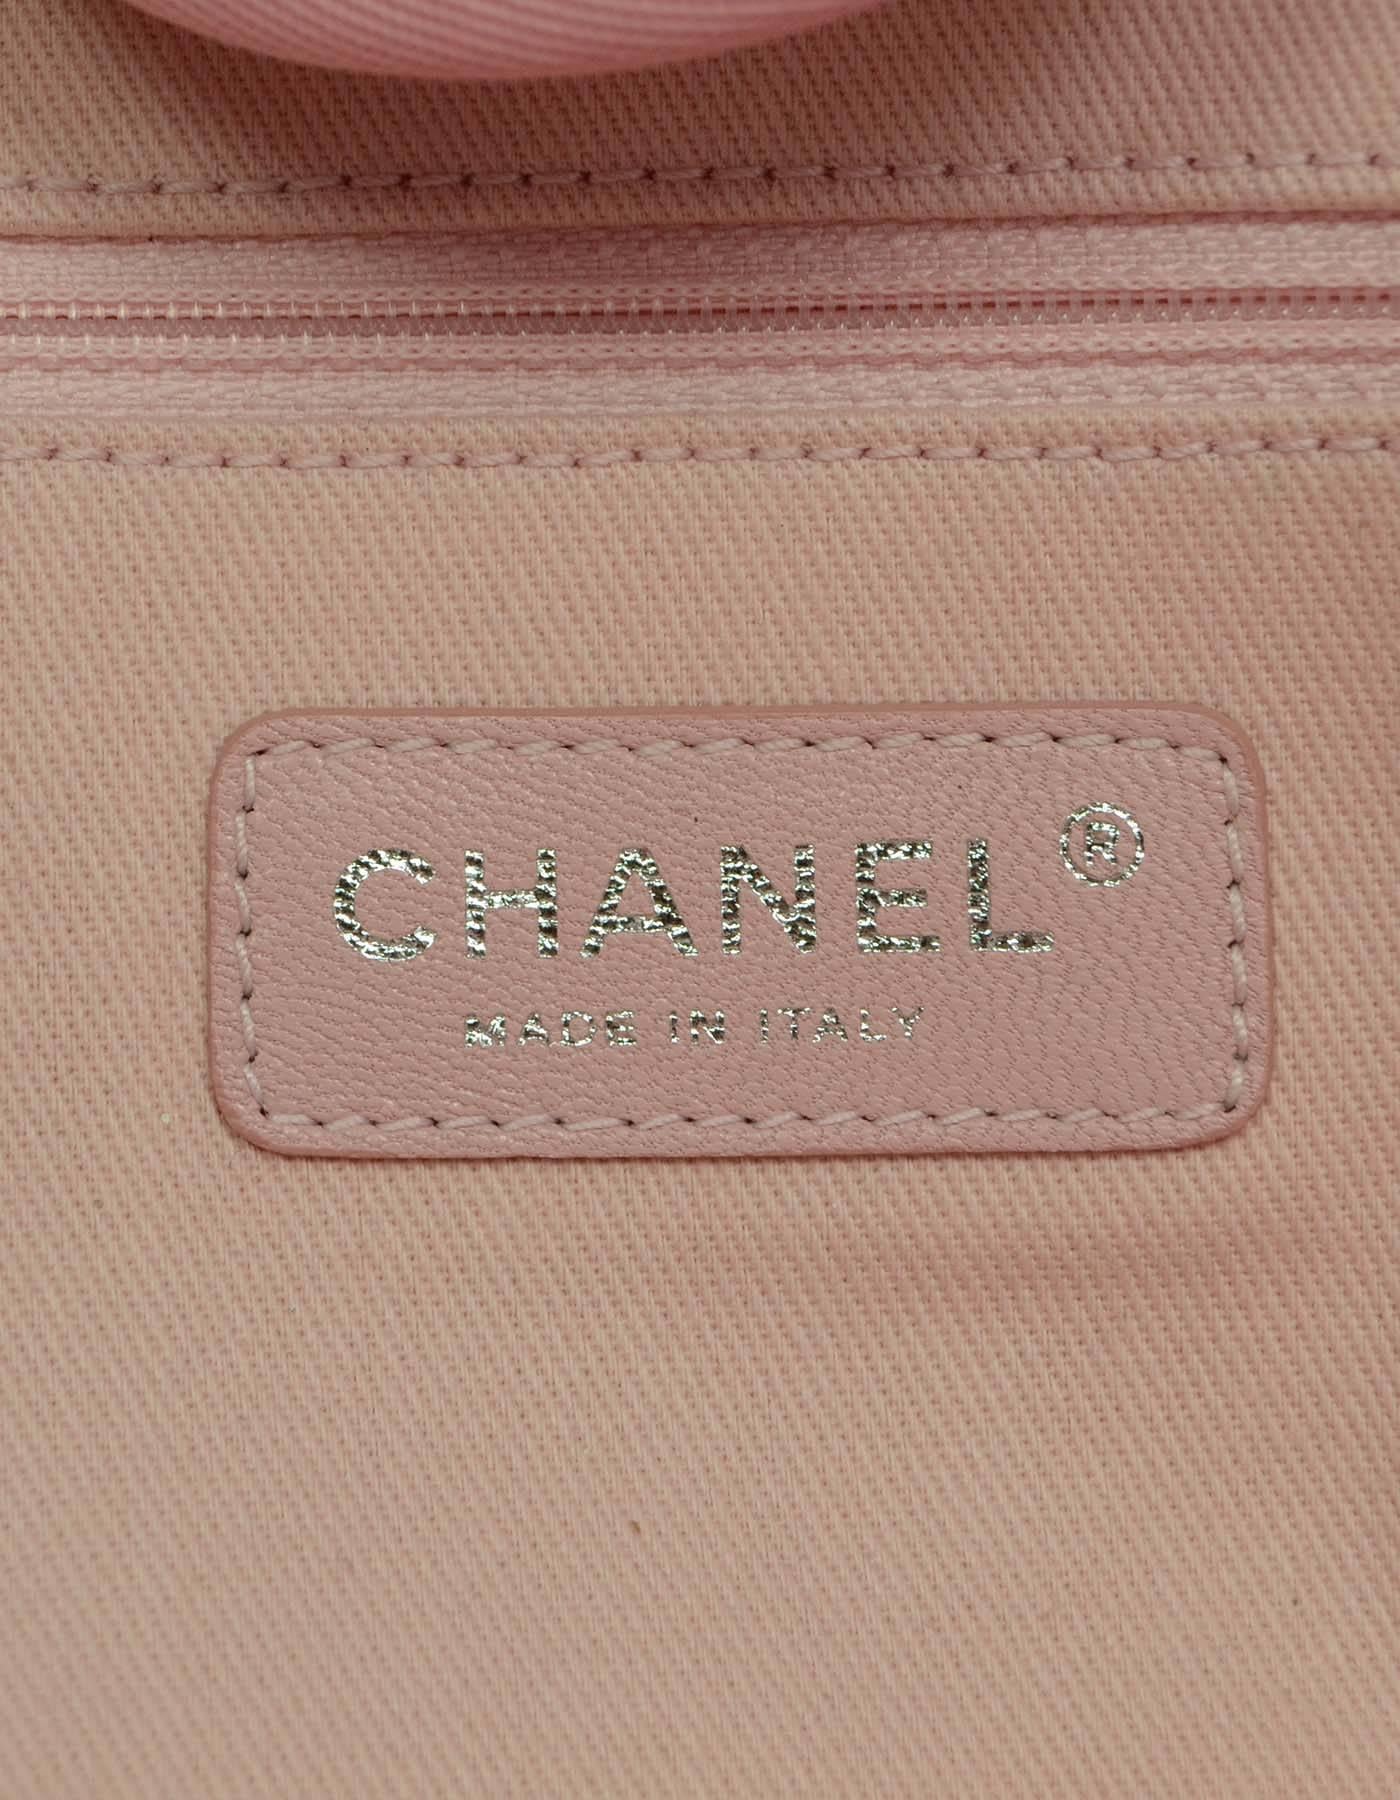 Women's Chanel Pink Canvas Deauville Tote Bag SHW